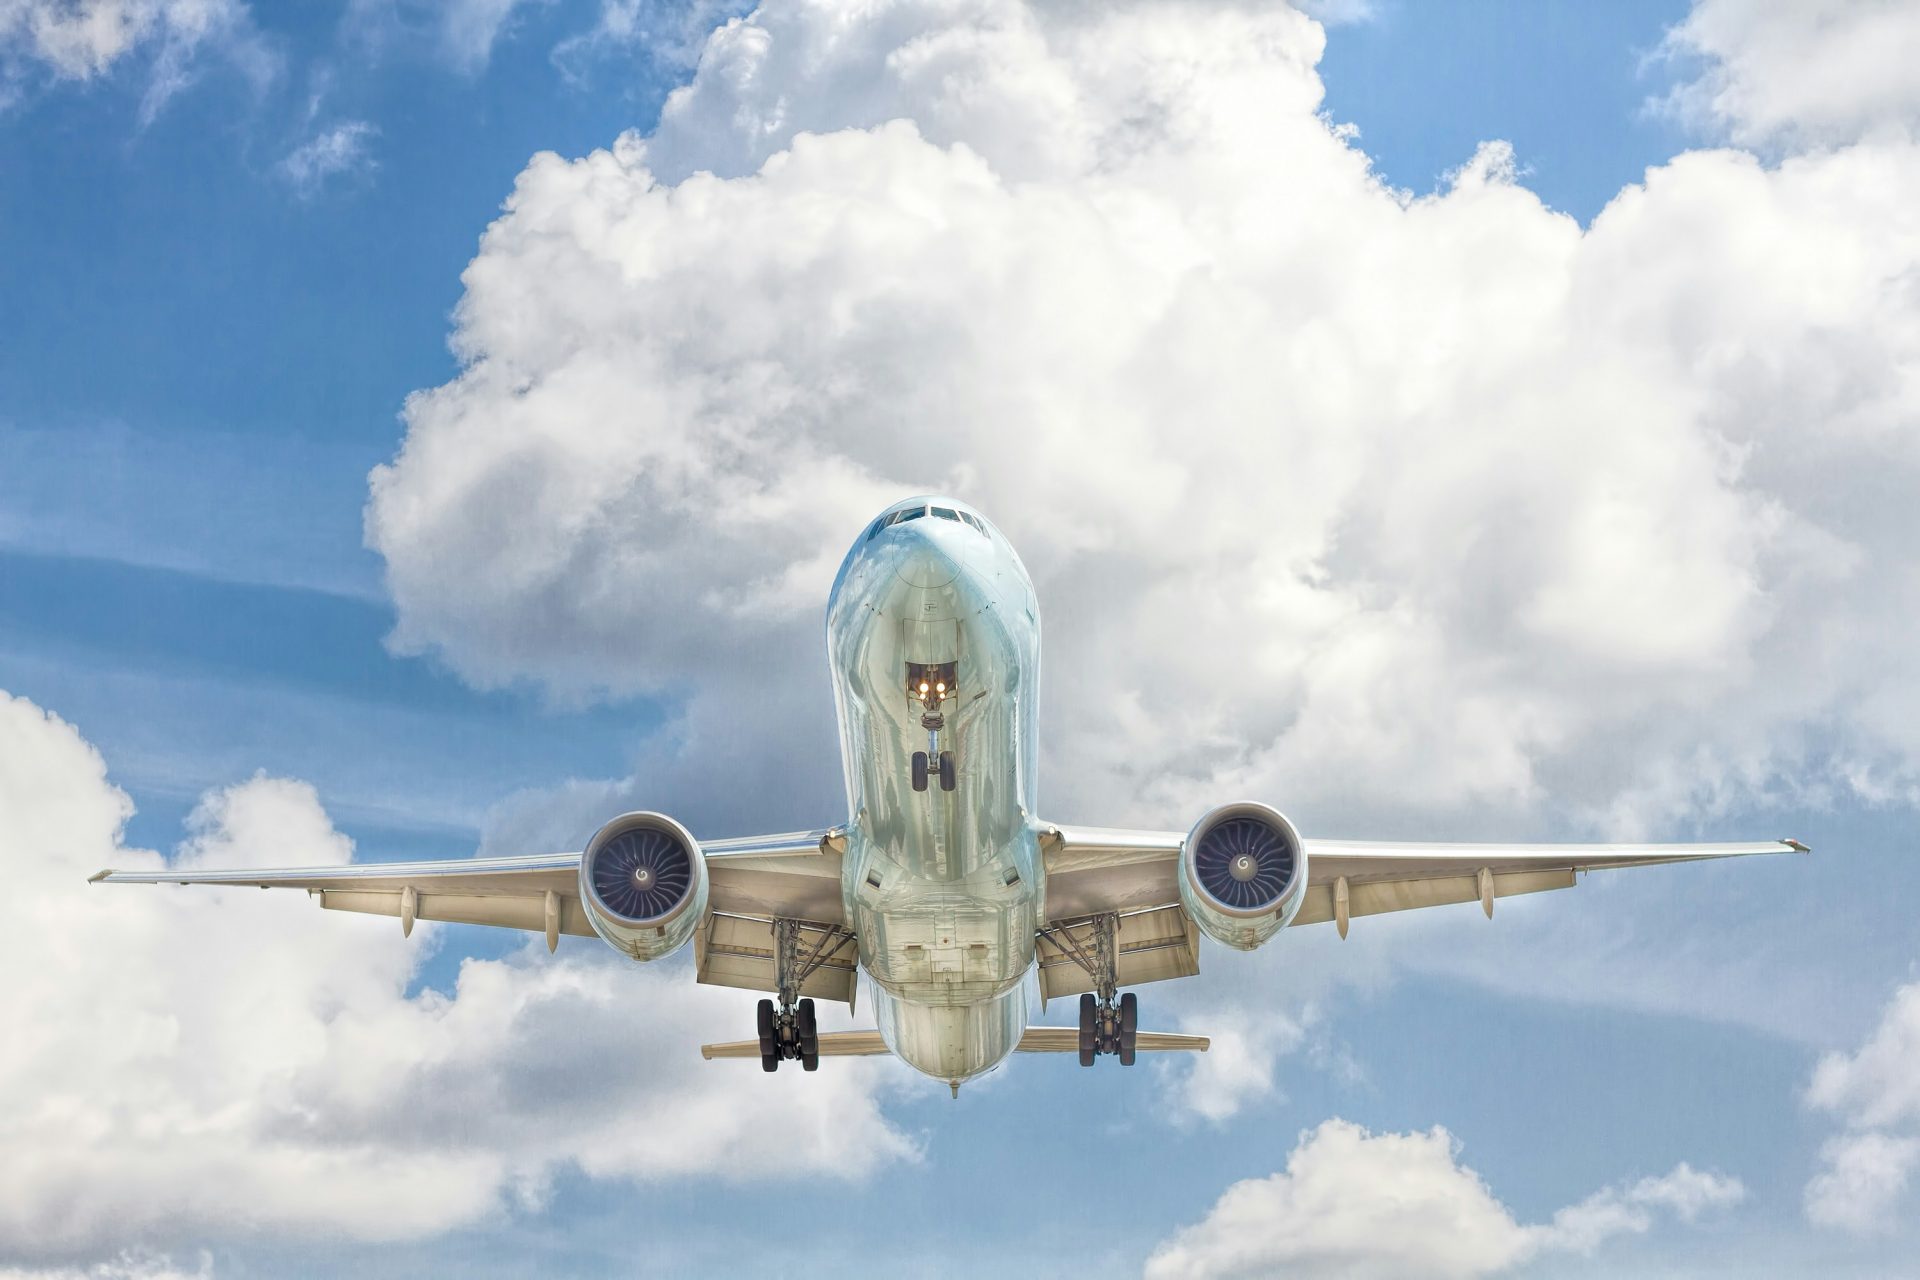 <p>Let's look at some arguments against aerophobia. Maybe they will help you be less afraid when boarding a plane.</p> <p>Photo: John Mcarthur / Unsplash</p>